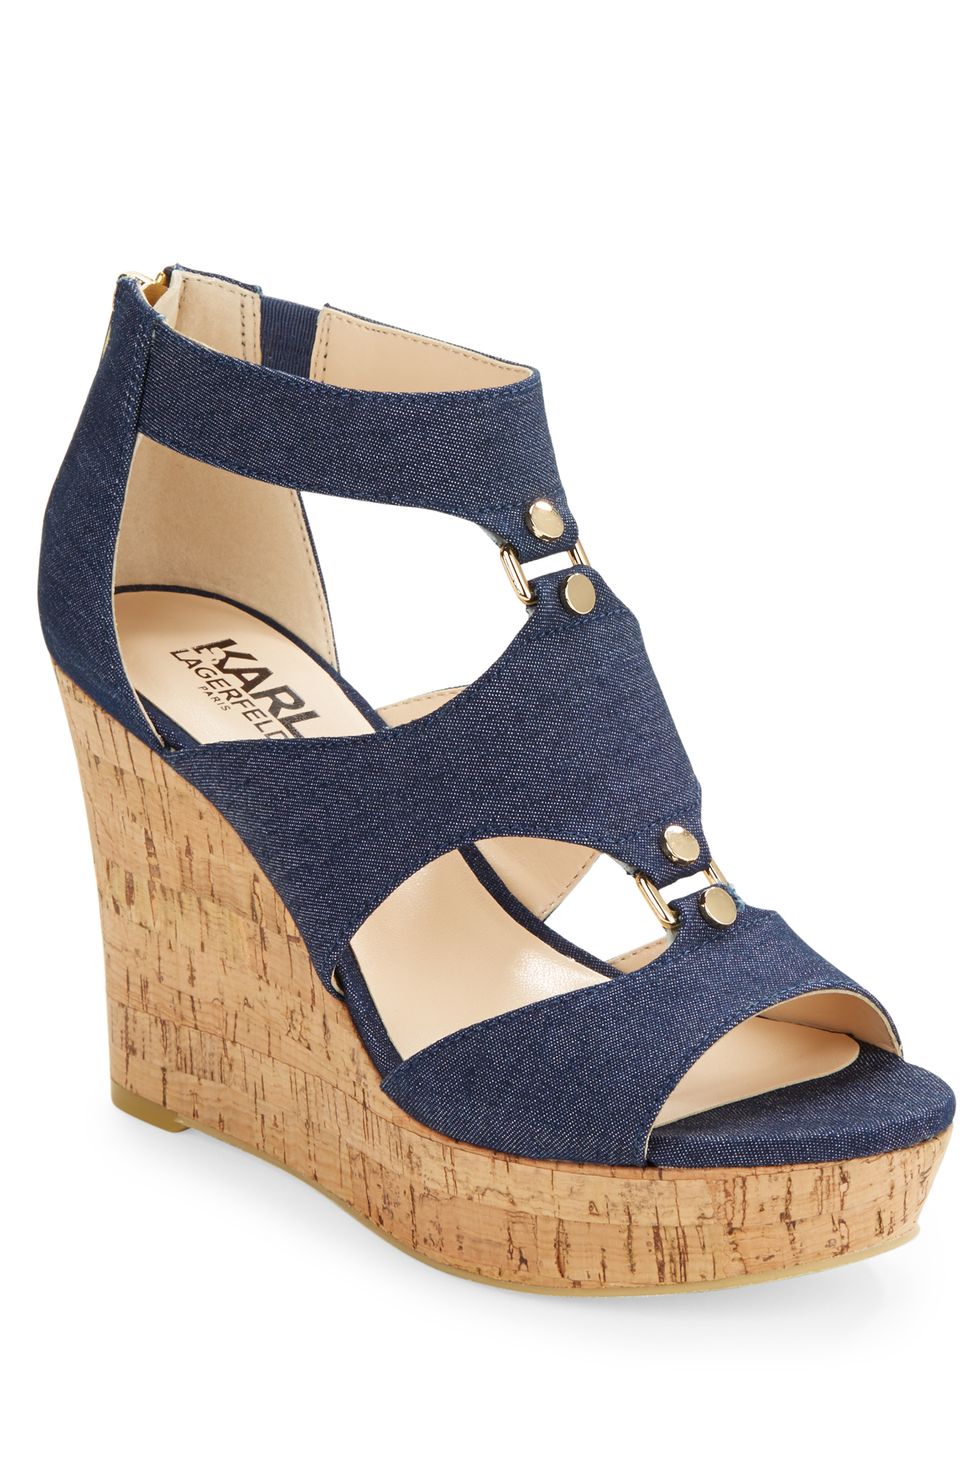 <p>Neutral wedges make the whole denim shoe trend accessible for easy-breezy wear any day of the week (bonus if they're ultra-comfy). Reach for them with white pants, dresses, and even a pair of velvet shorts.</p><p><em>Karl Lagerfeld Savaoie Platform Wedge Sandals, $109; </em><a href="http://www.lordandtaylor.com/webapp/wcs/stores/servlet/en/lord-and-taylor/savoie-platform-wedge-sandals" target="_blank"><em>lordandtaylor.com</em></a></p>